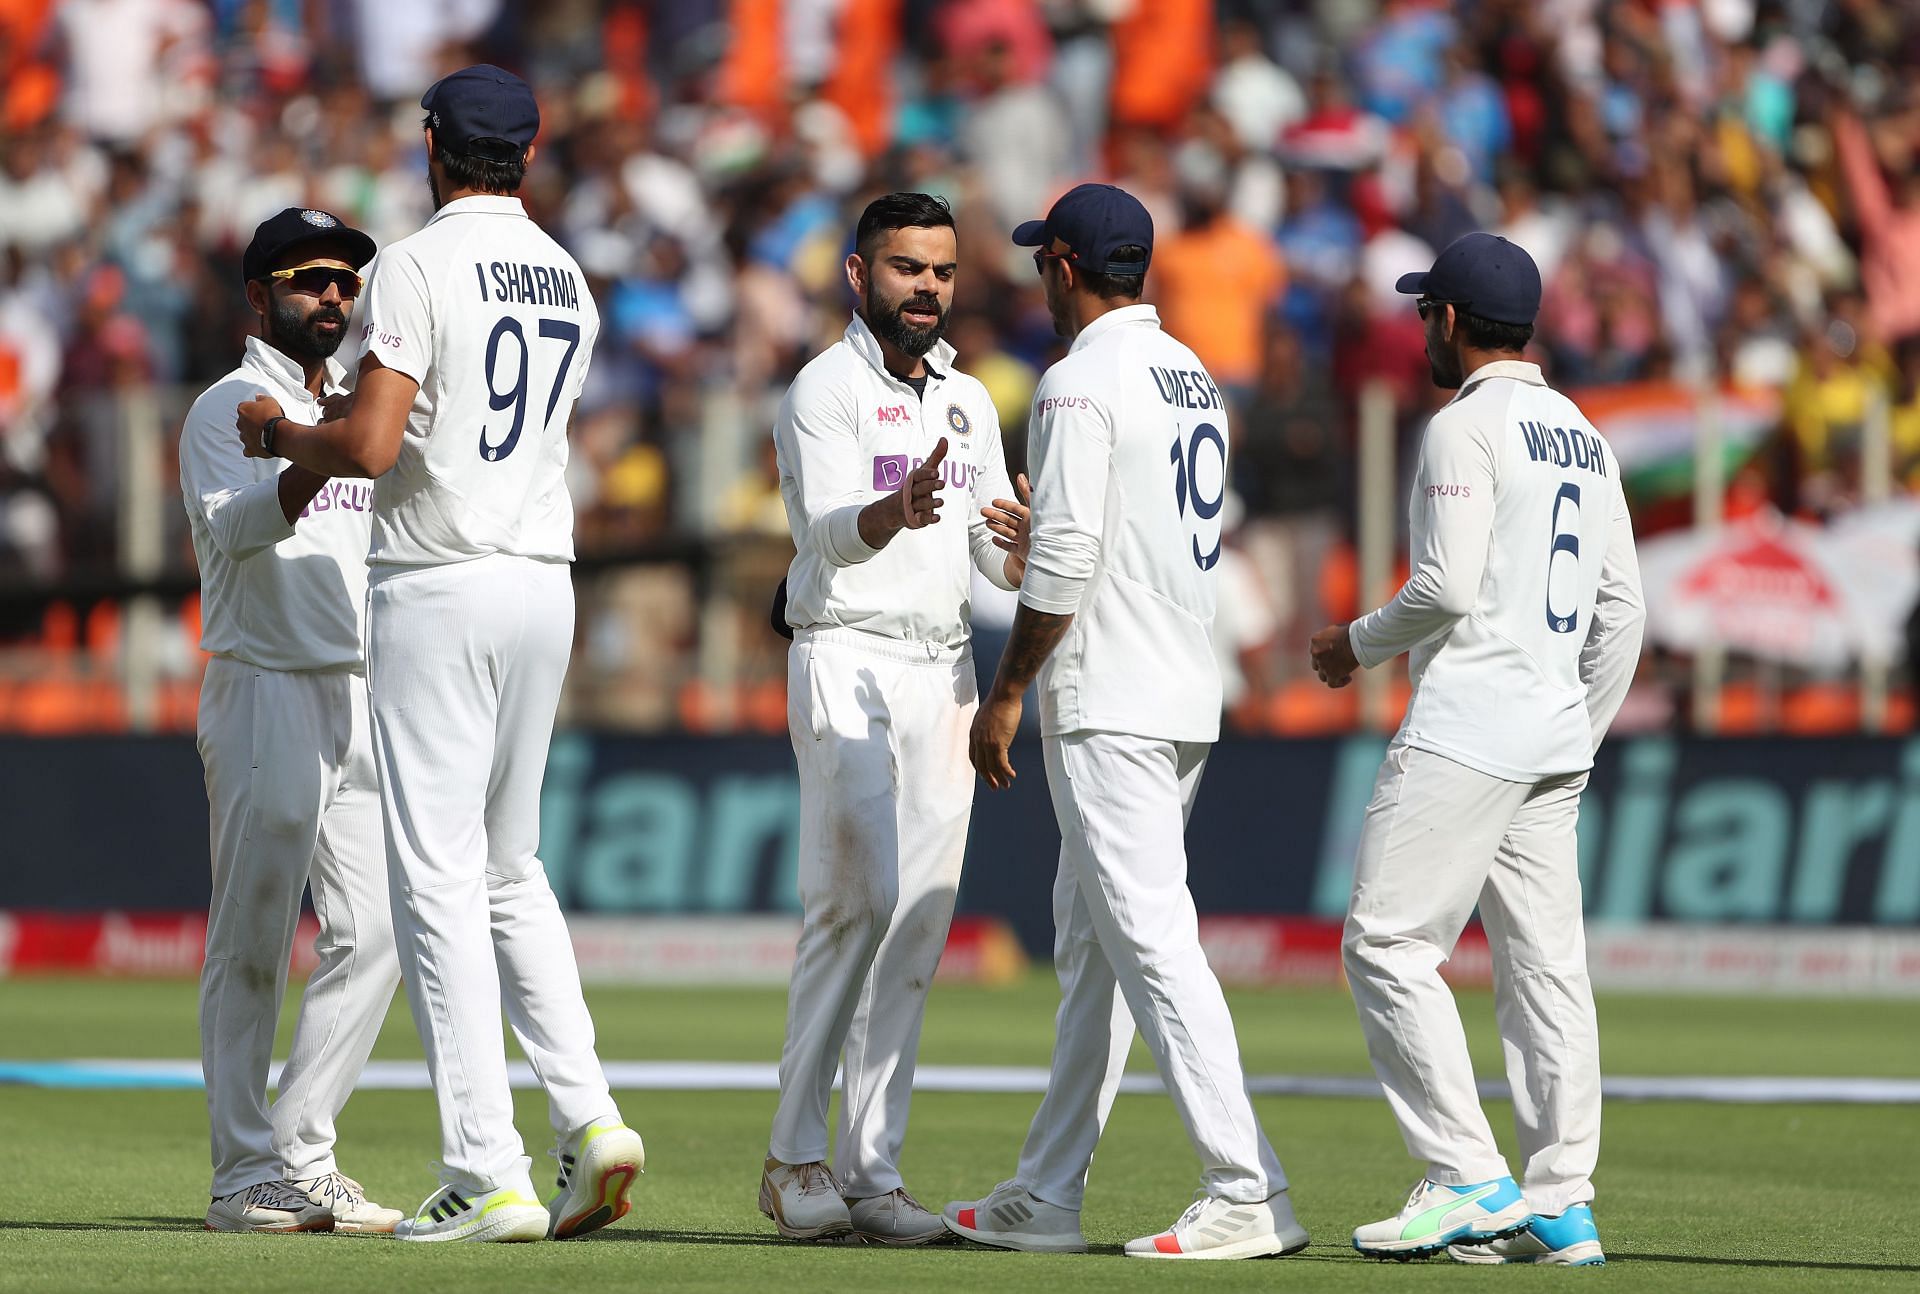 The hosts won the 2021 series at home against England after losing the first Test. (Pic: Getty Images)